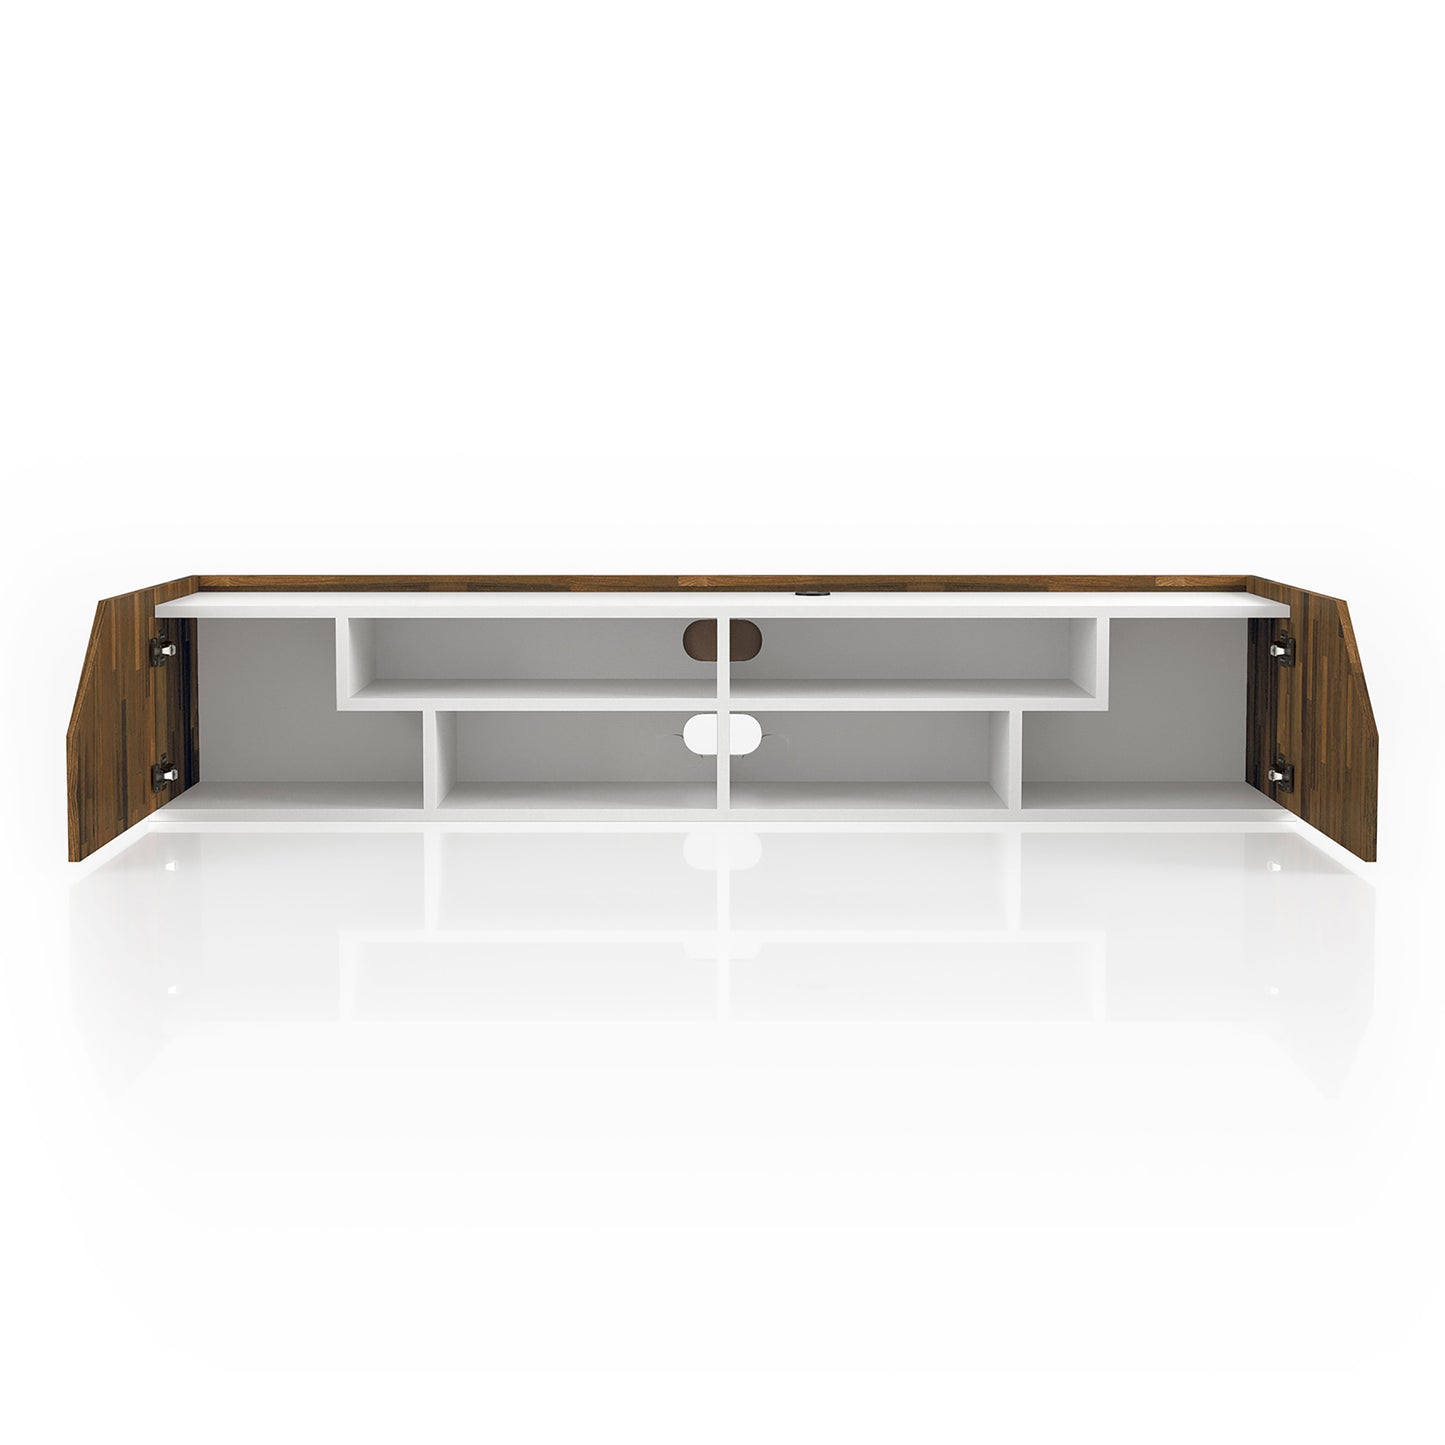 Front-facing transitional white and wood four-shelf floating TV stand with doors open on a white background